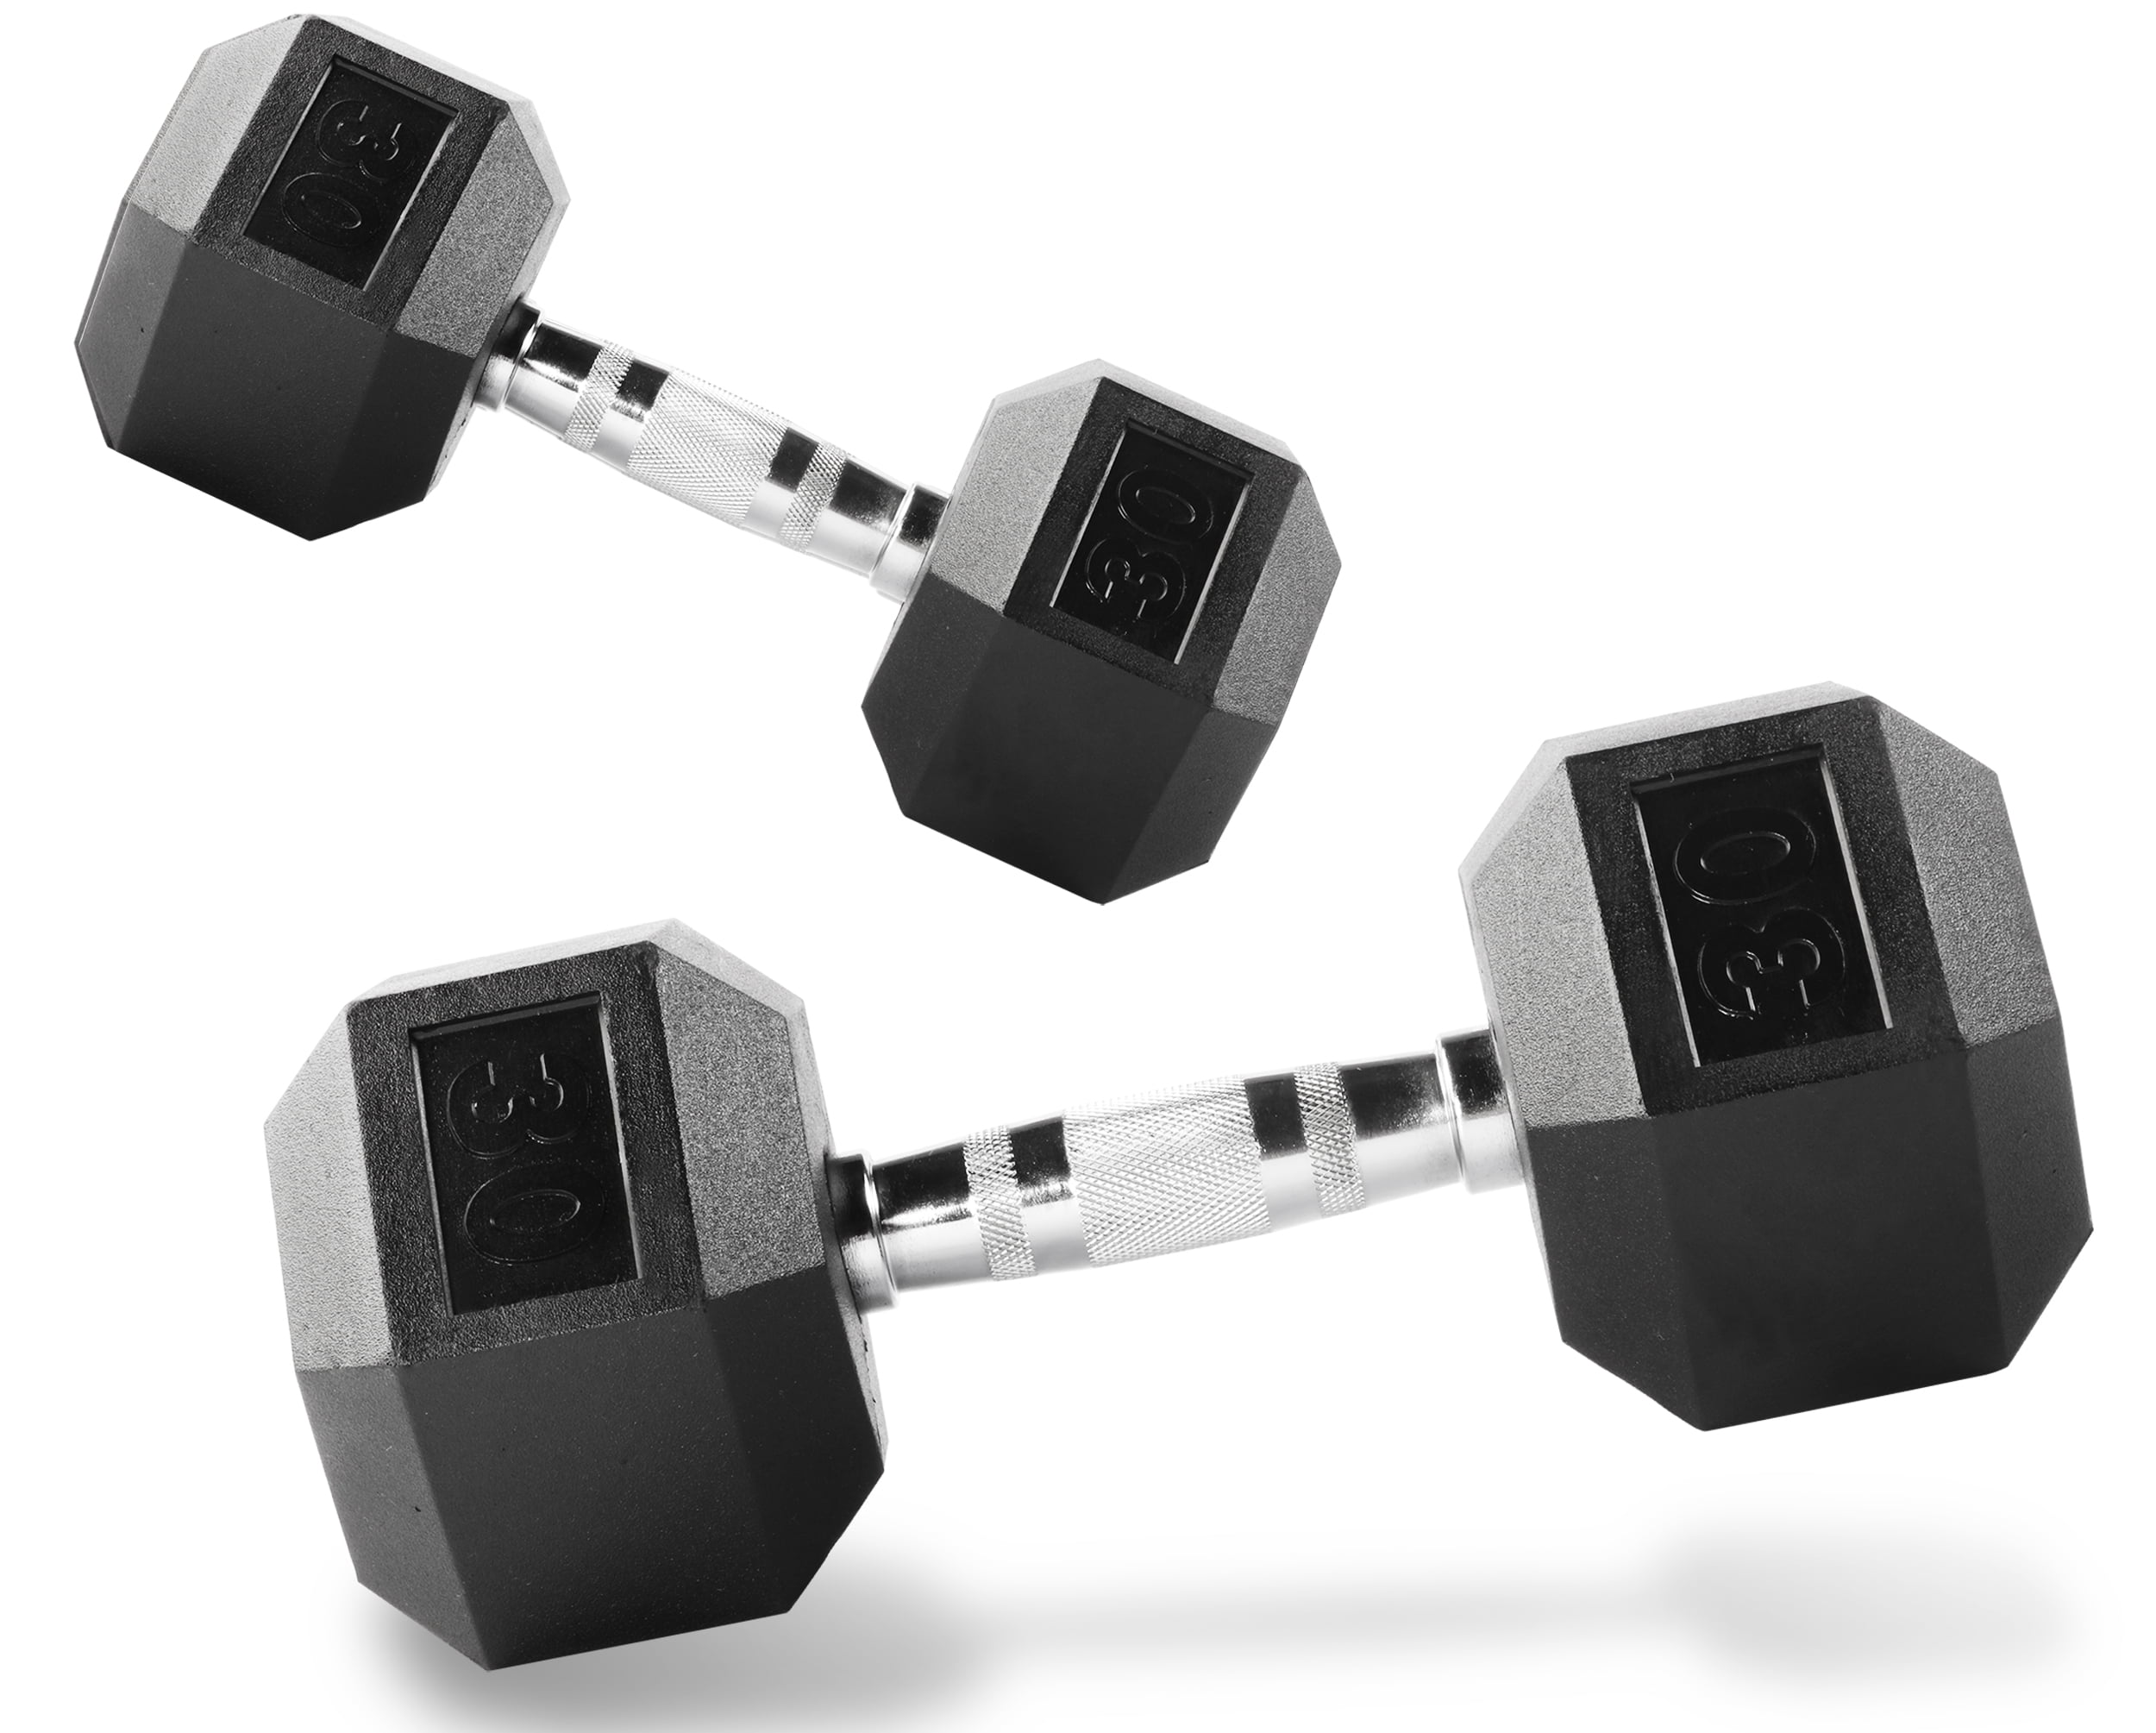 Sporteq Gym Use Rubber Encased 1kg to 30kg Hex Dumbbell Weights Sold in Pairs. 